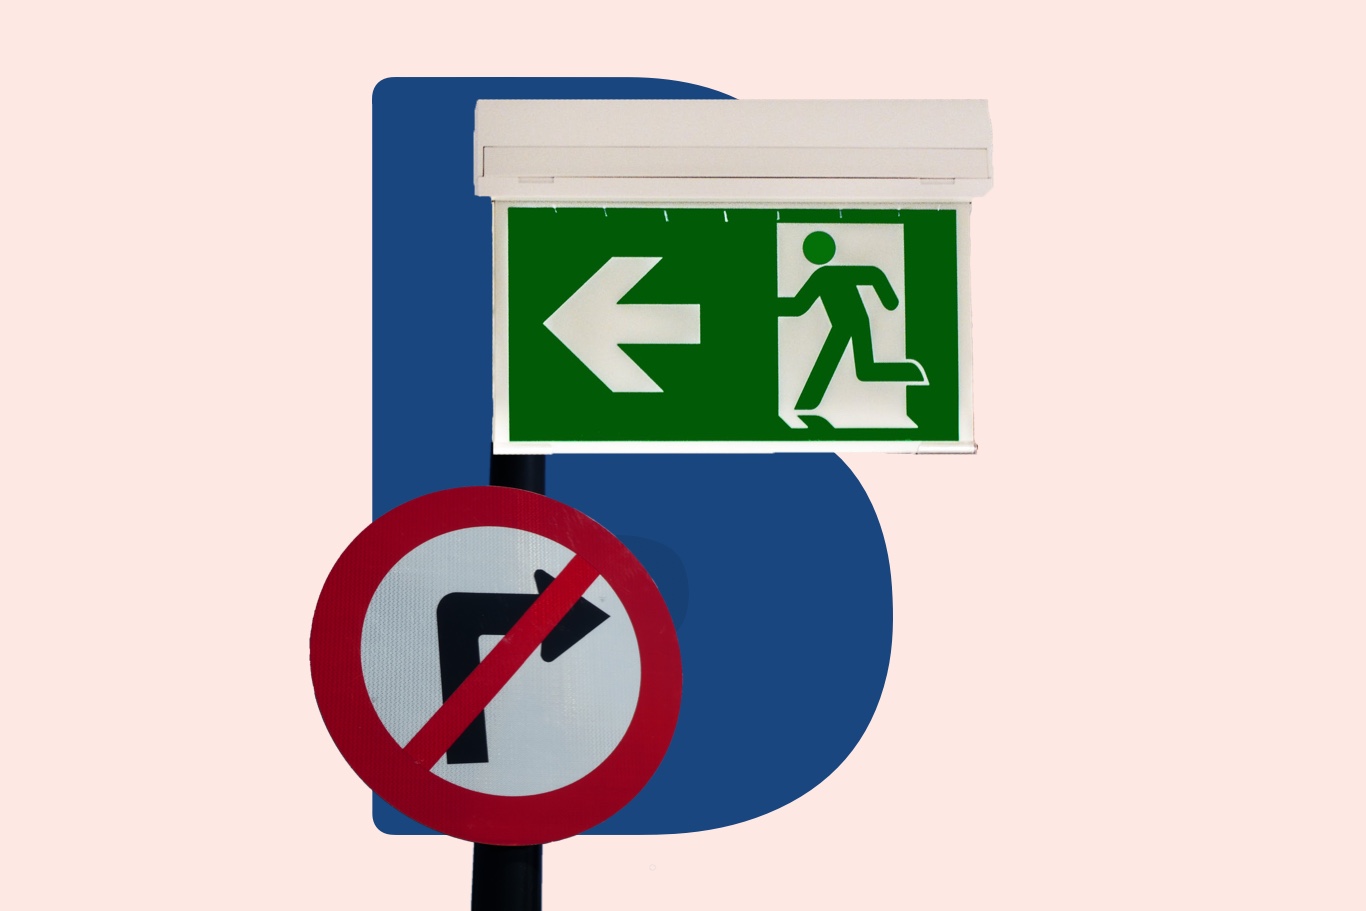 What are the types of safety signs